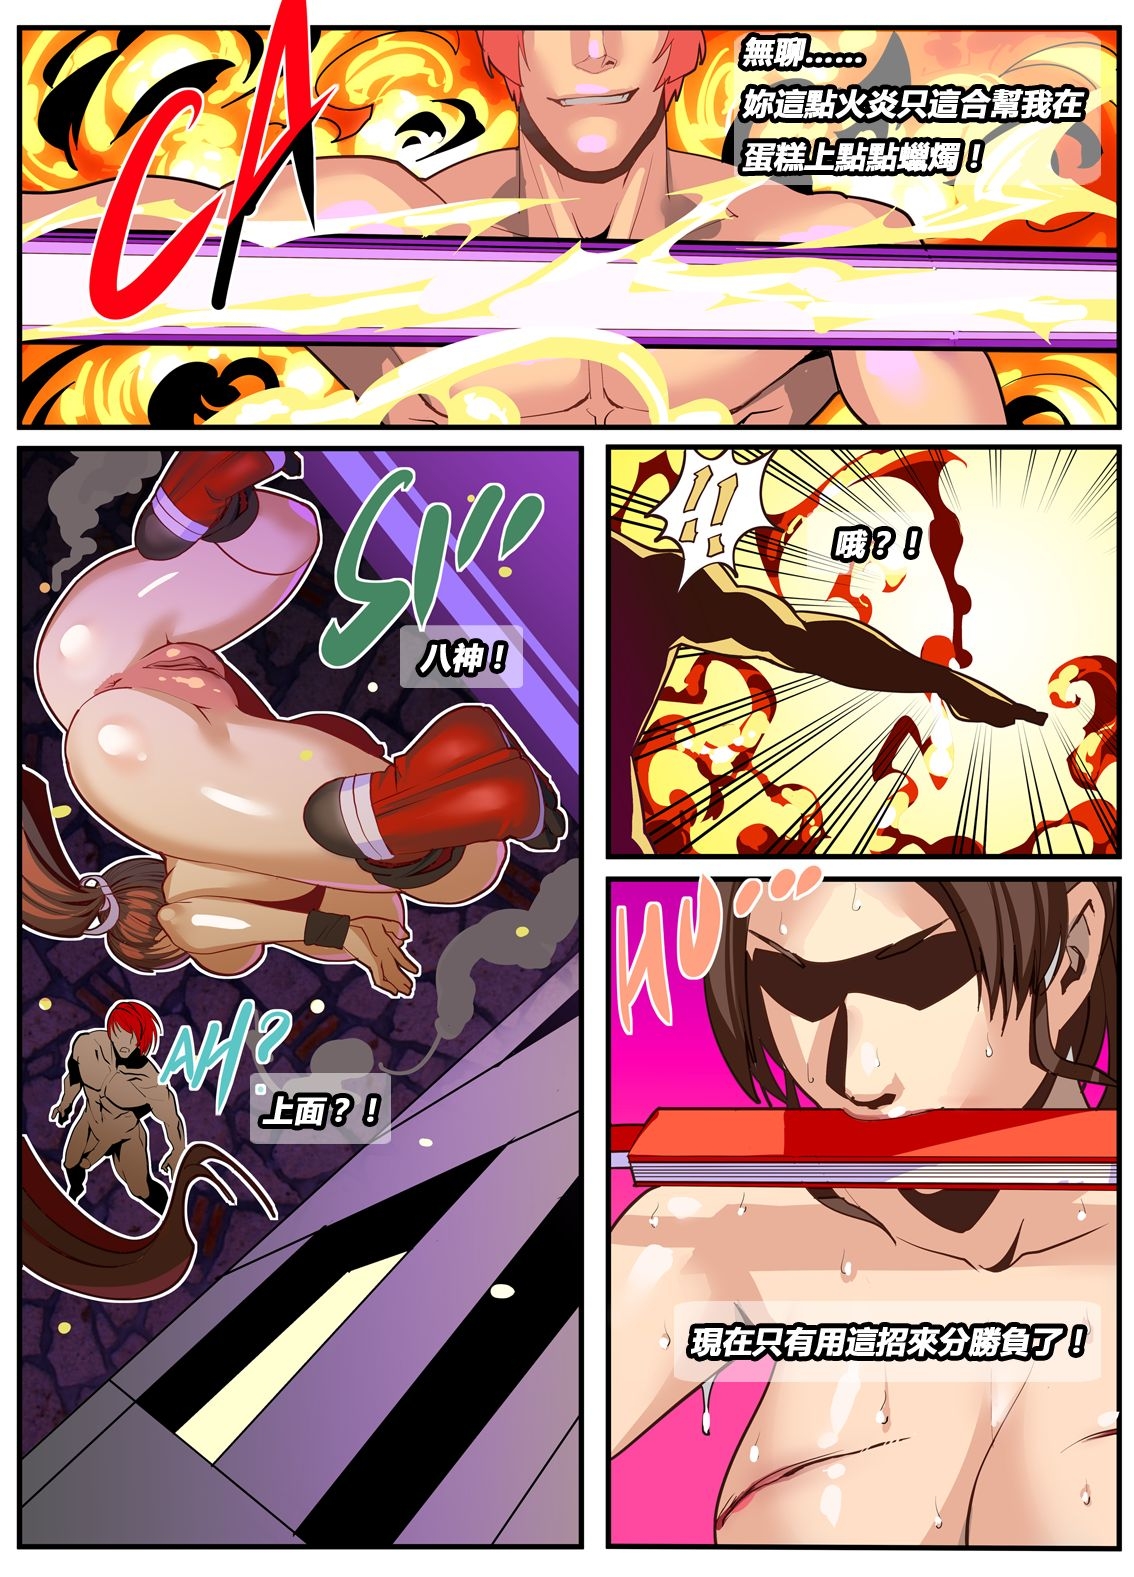 [chunlieater] The Lust of Mai Shiranui (King of Fighters) [Chinese] 27